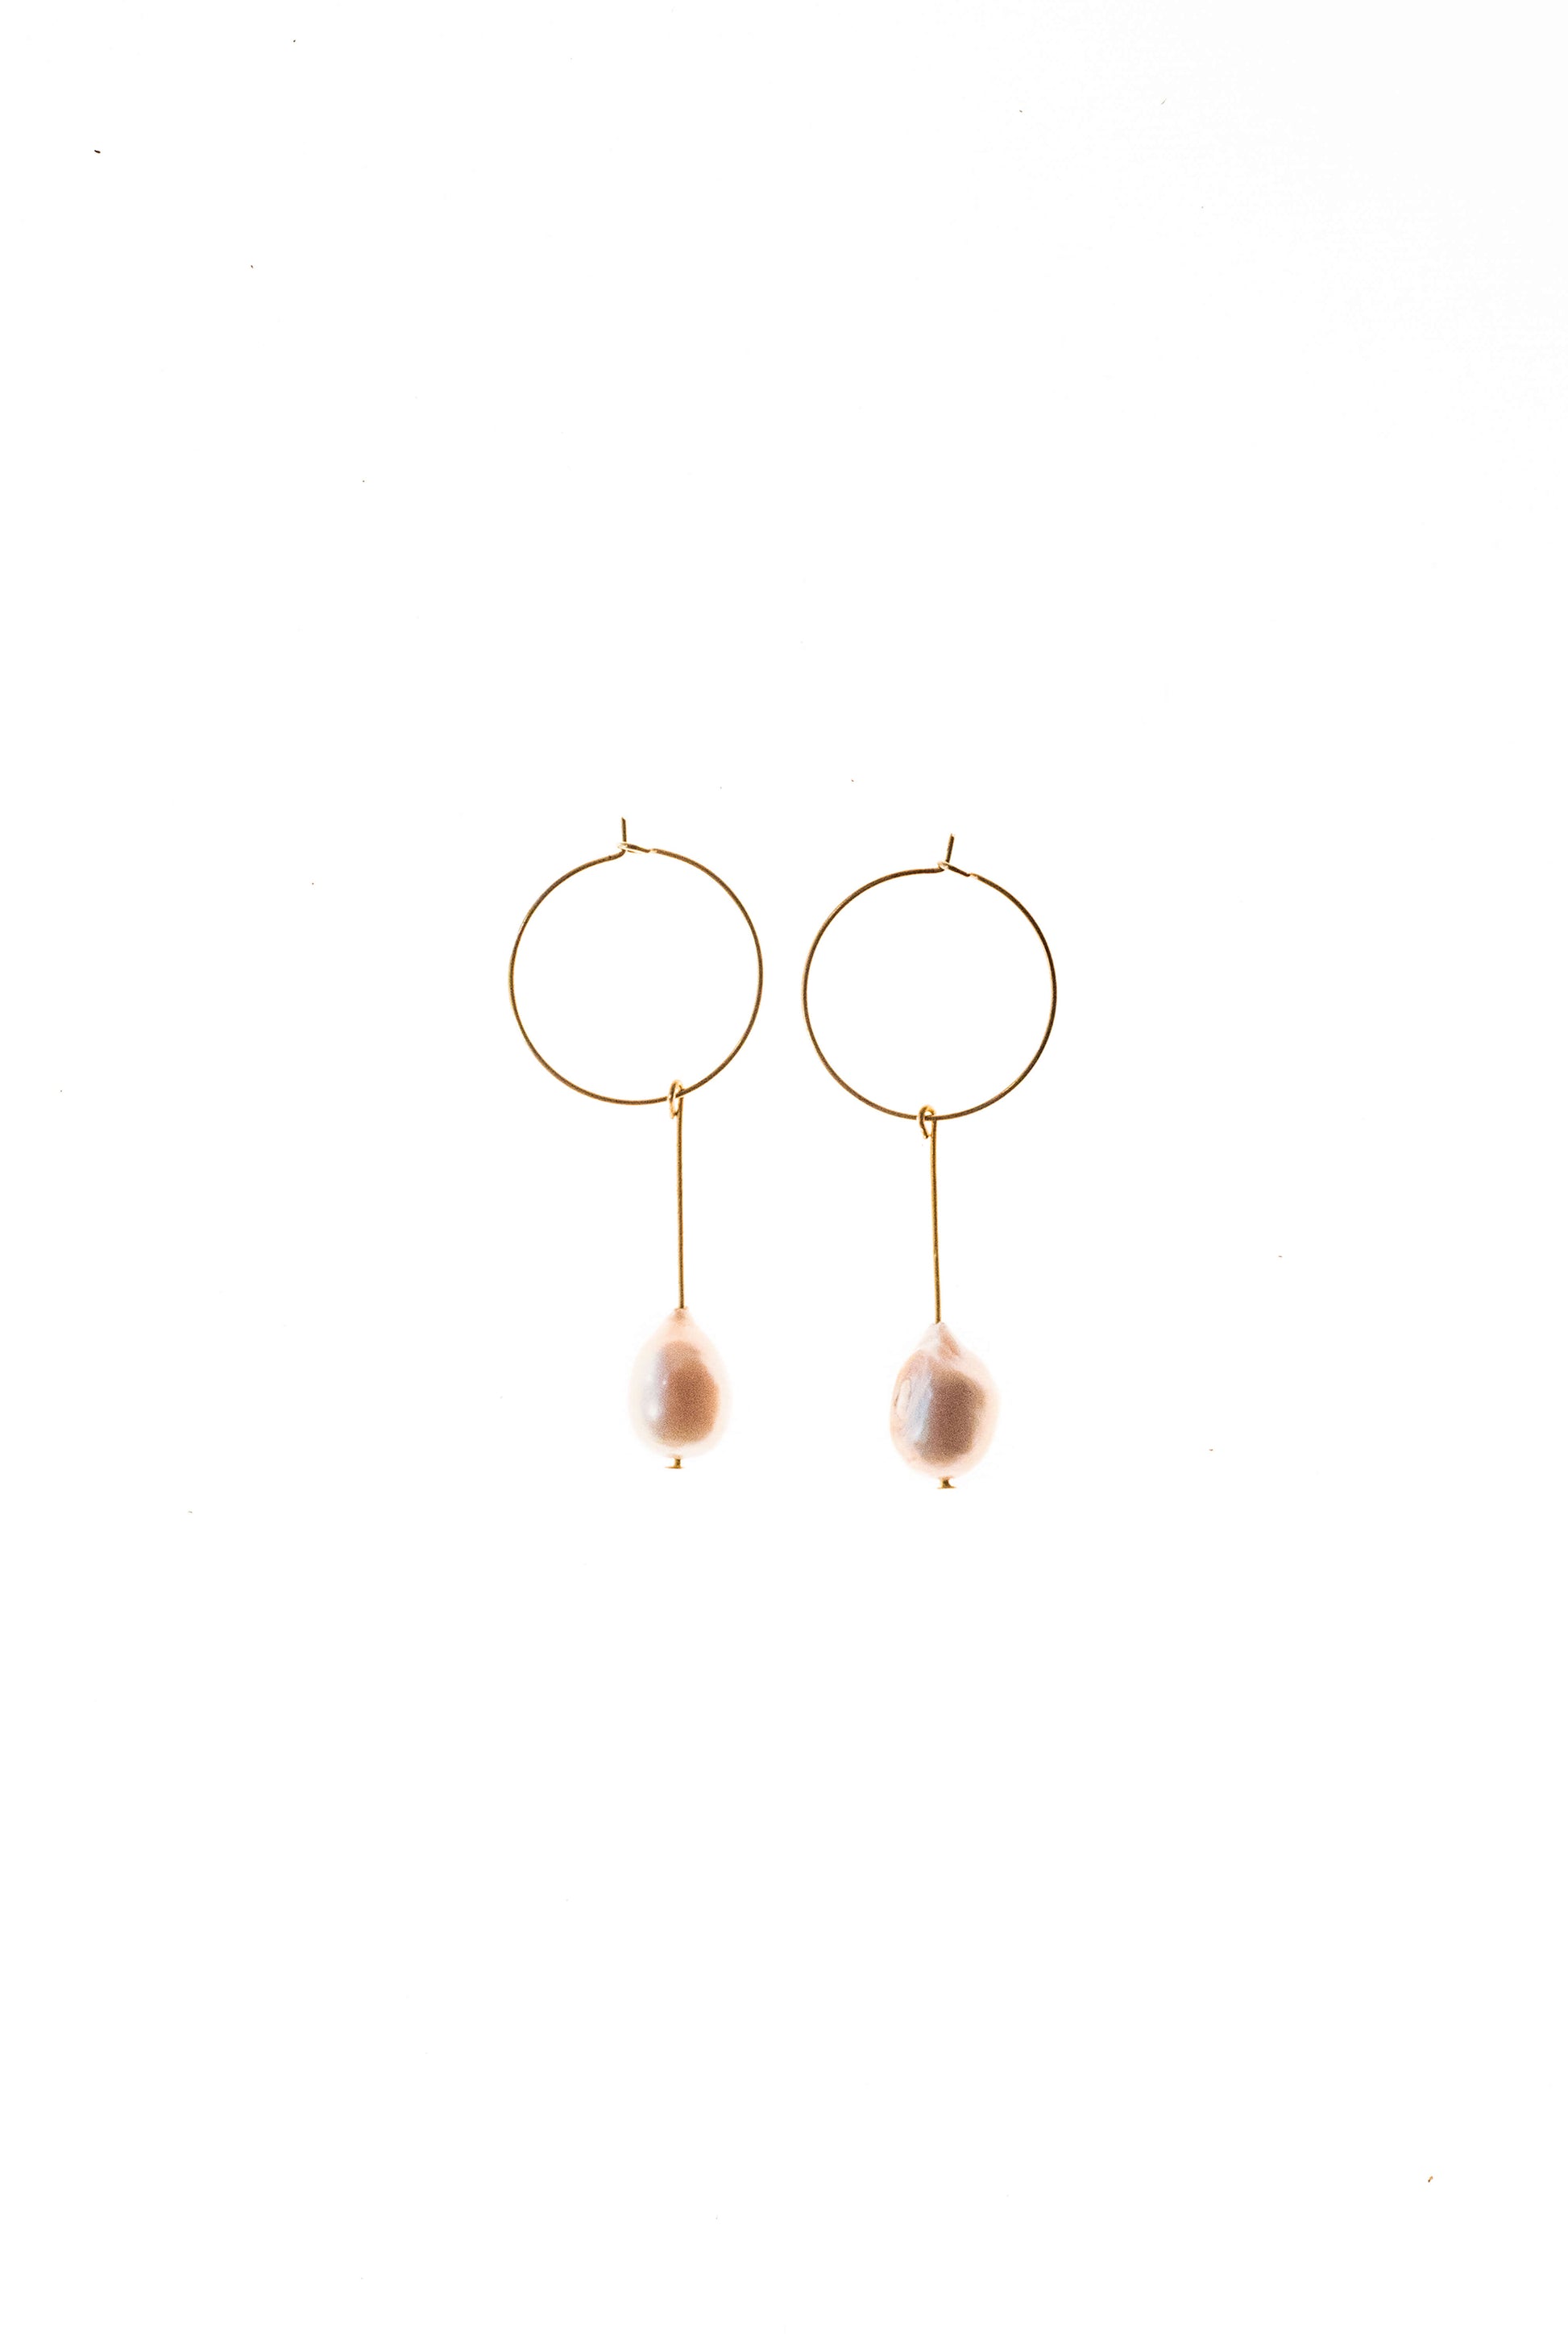 Earrings made of 24K gold plated brass and pink freshwater pearl.